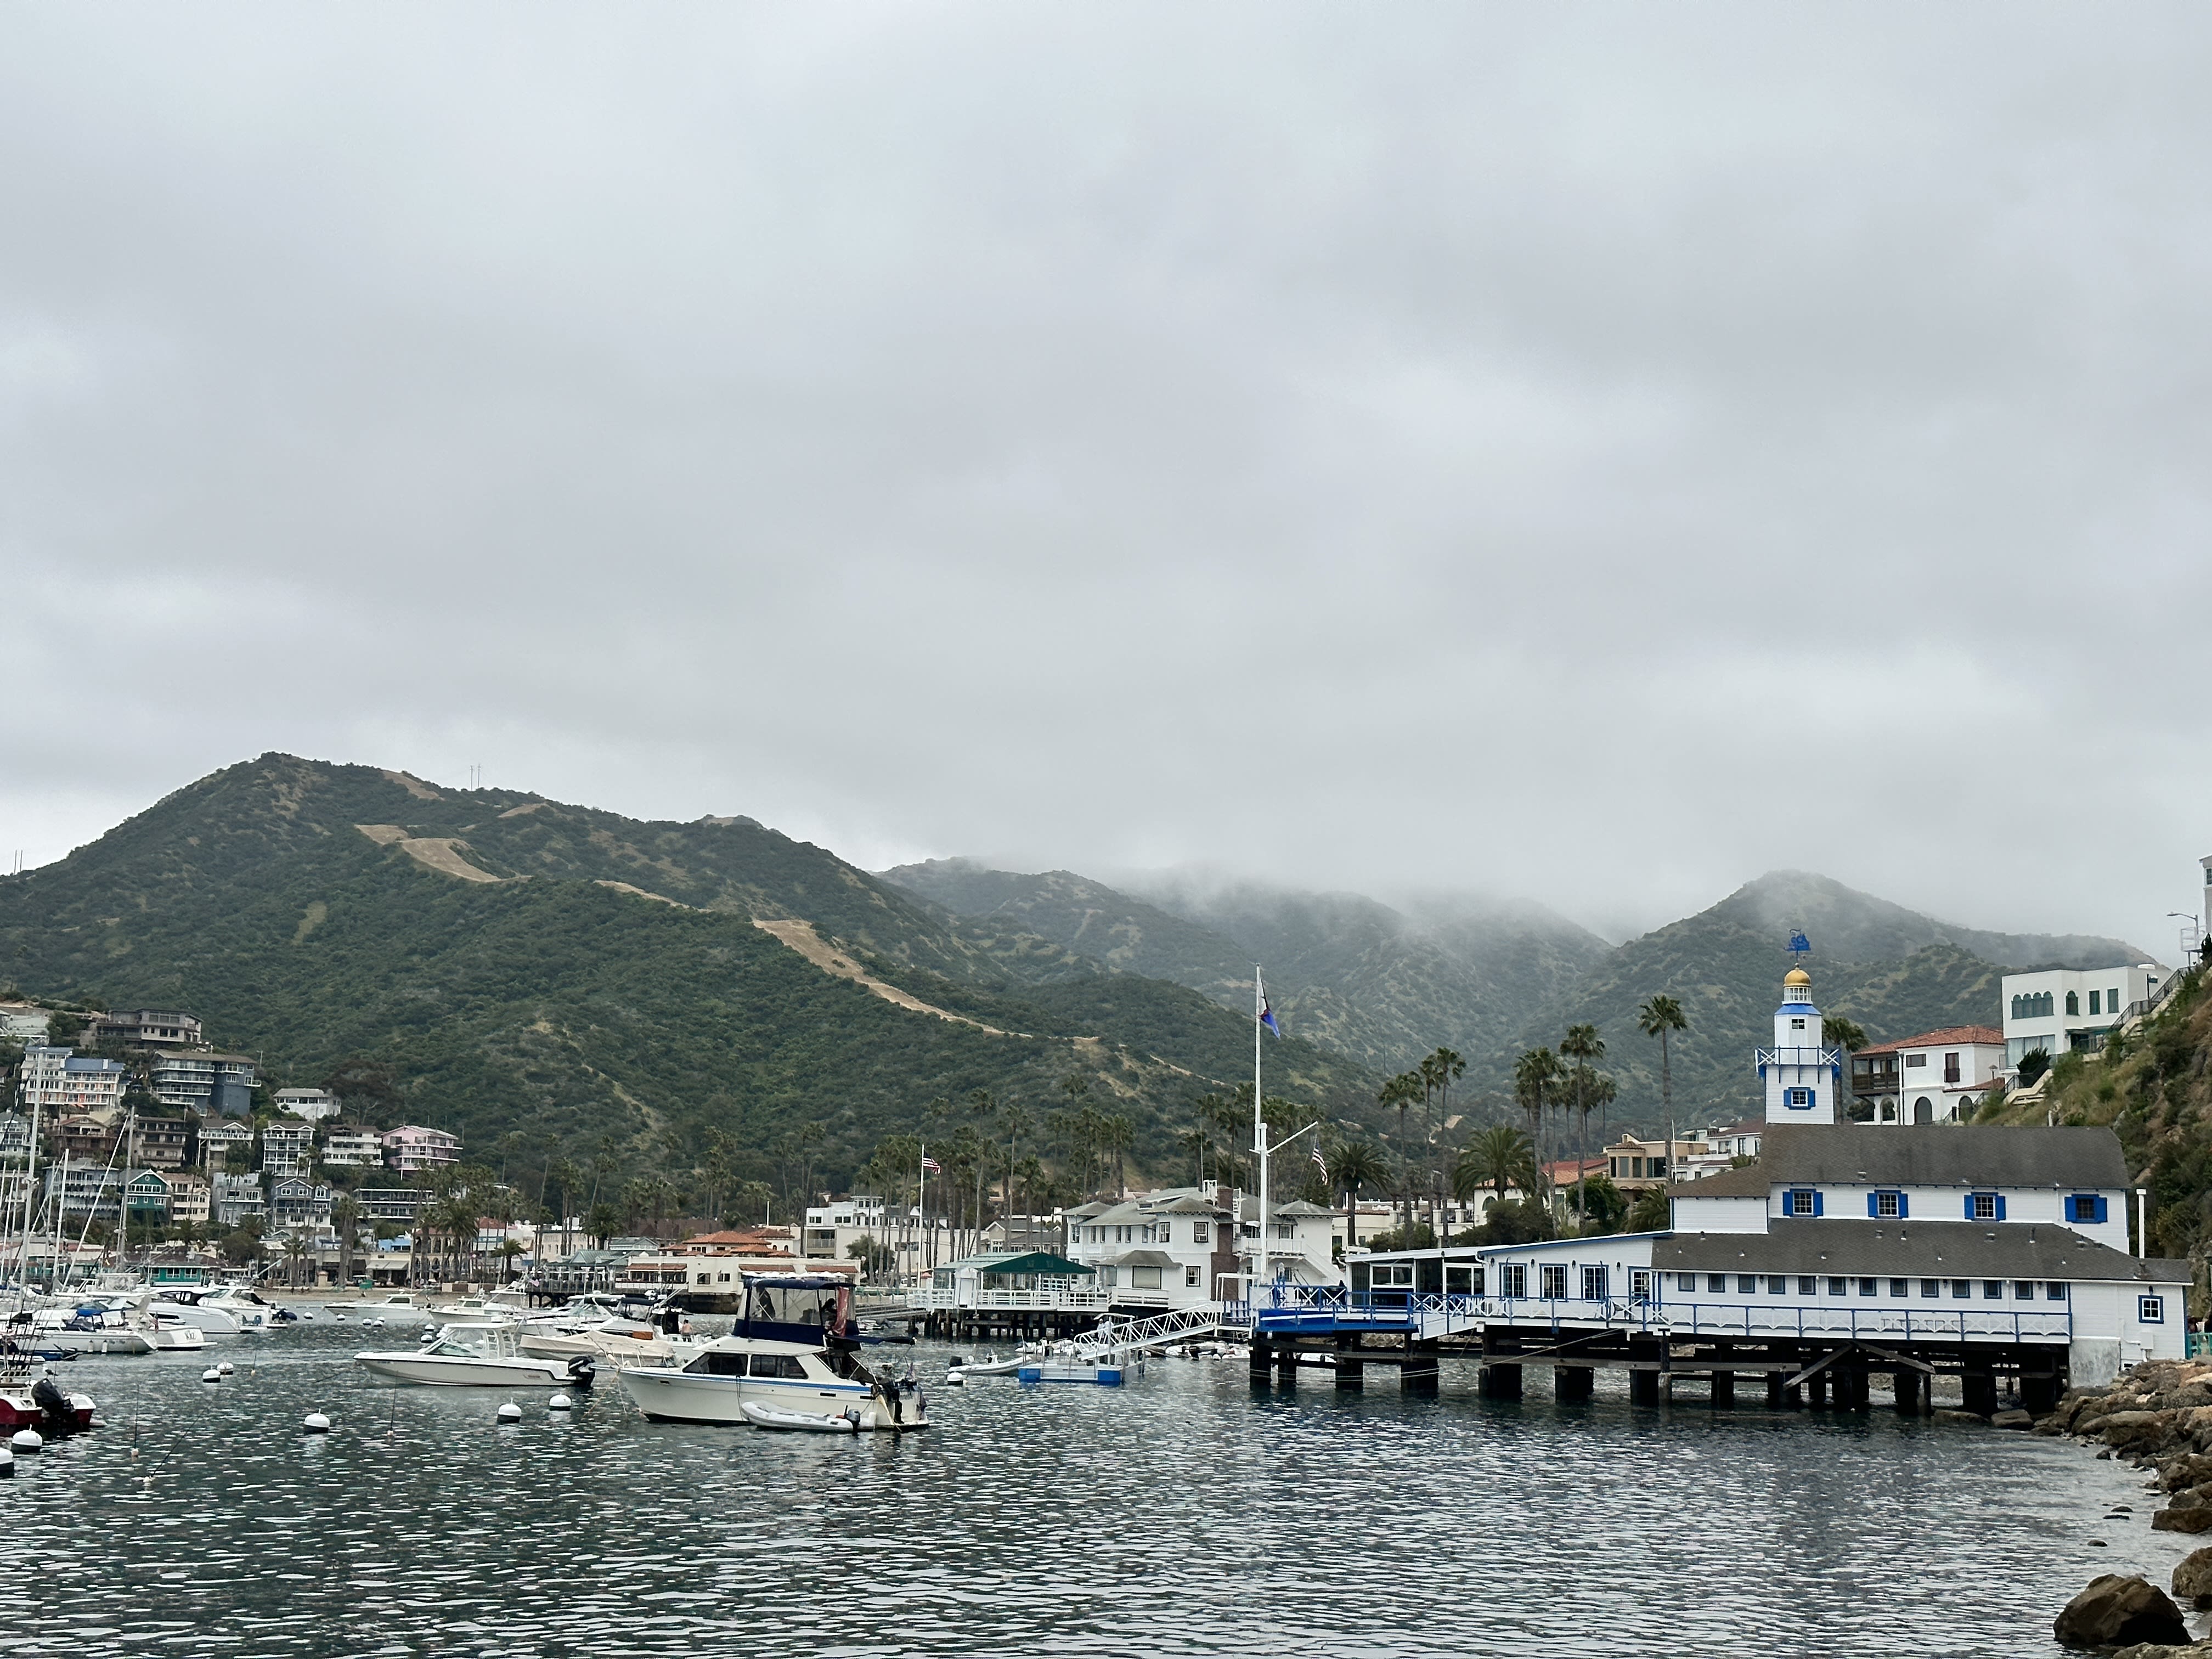 Overlooking the bay of Catalina Island, from ground level, with boats dotting the water and foggy mountains in the distance, an overcast gray sky.